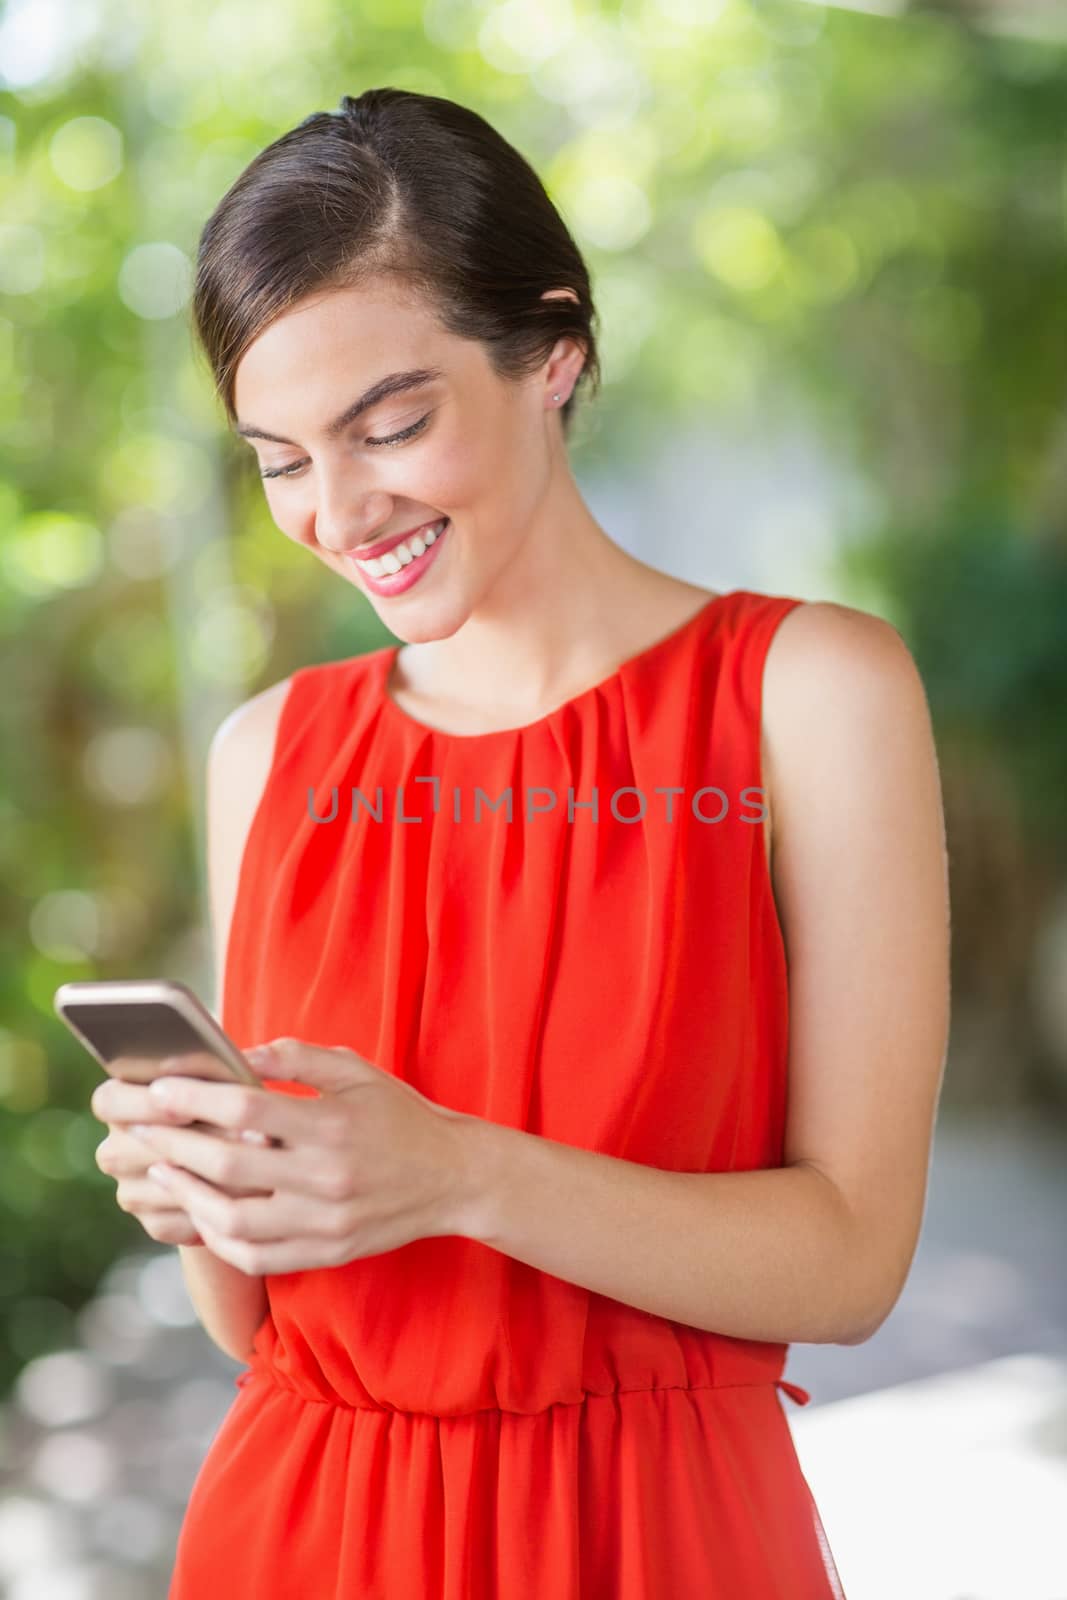 Woman smiling while using mobile phone by Wavebreakmedia